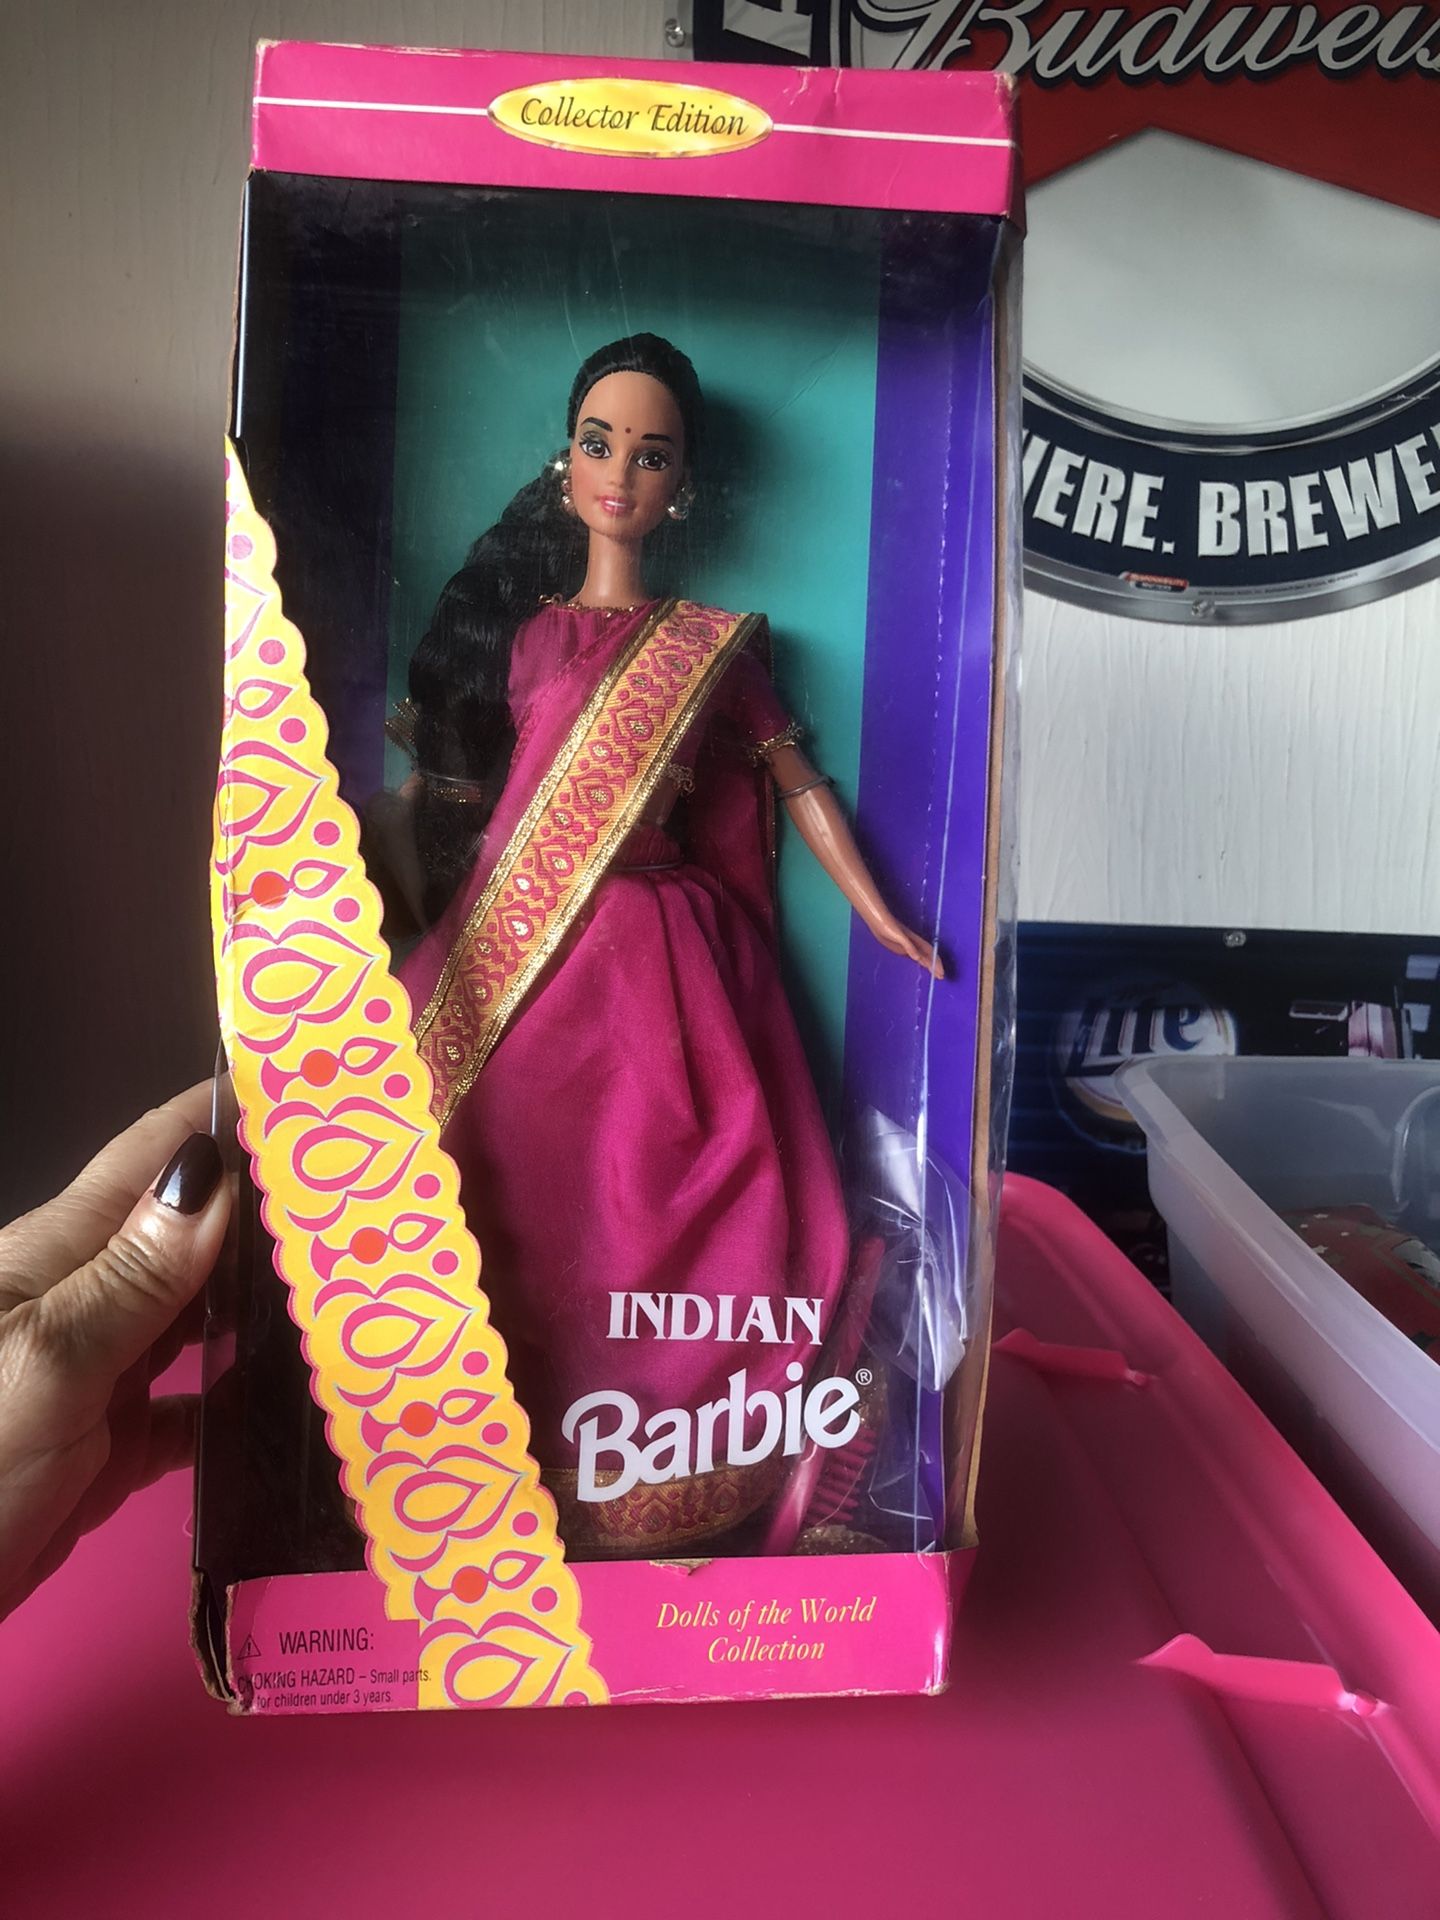 Dolls of The World Indian Barbie collection